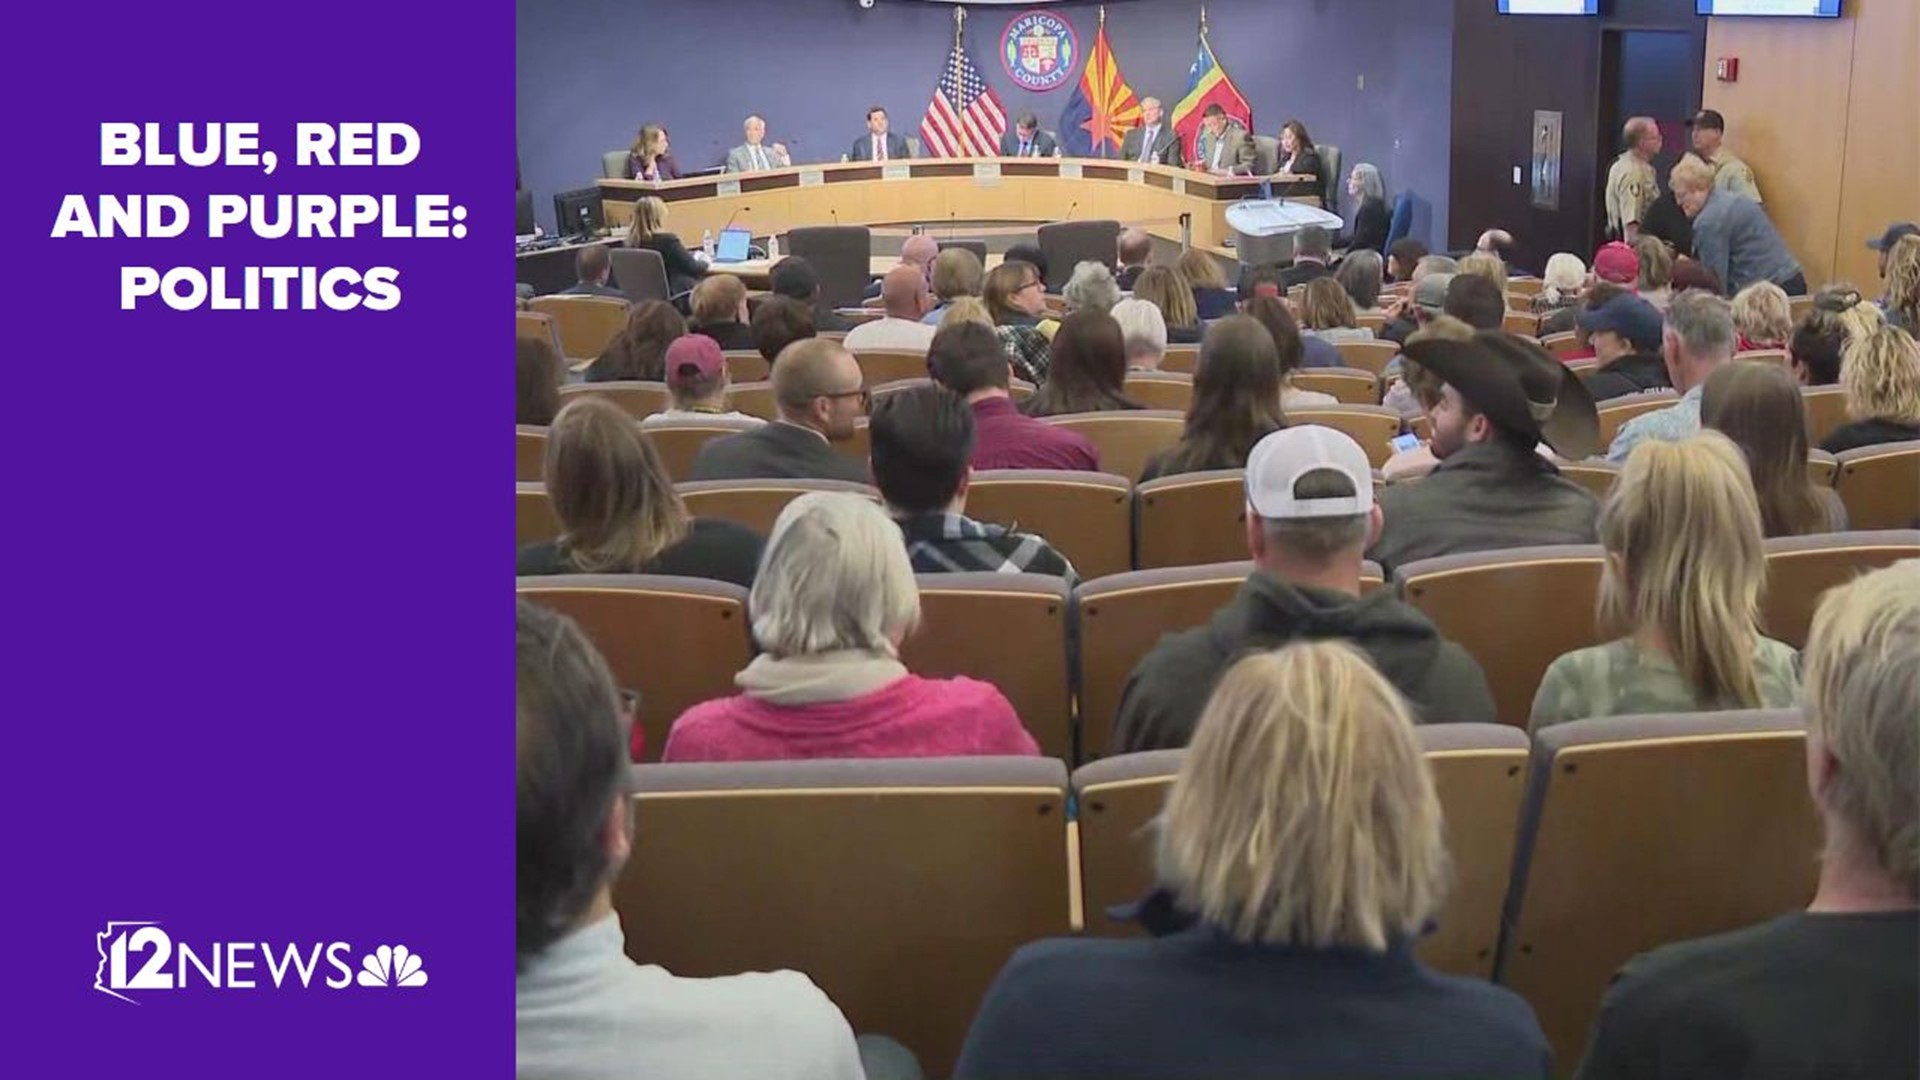 A unanimous vote by Maricopa County Board of Supervisors certified the most recent election votes. Dozens of protestors claim this certification to be unjust.